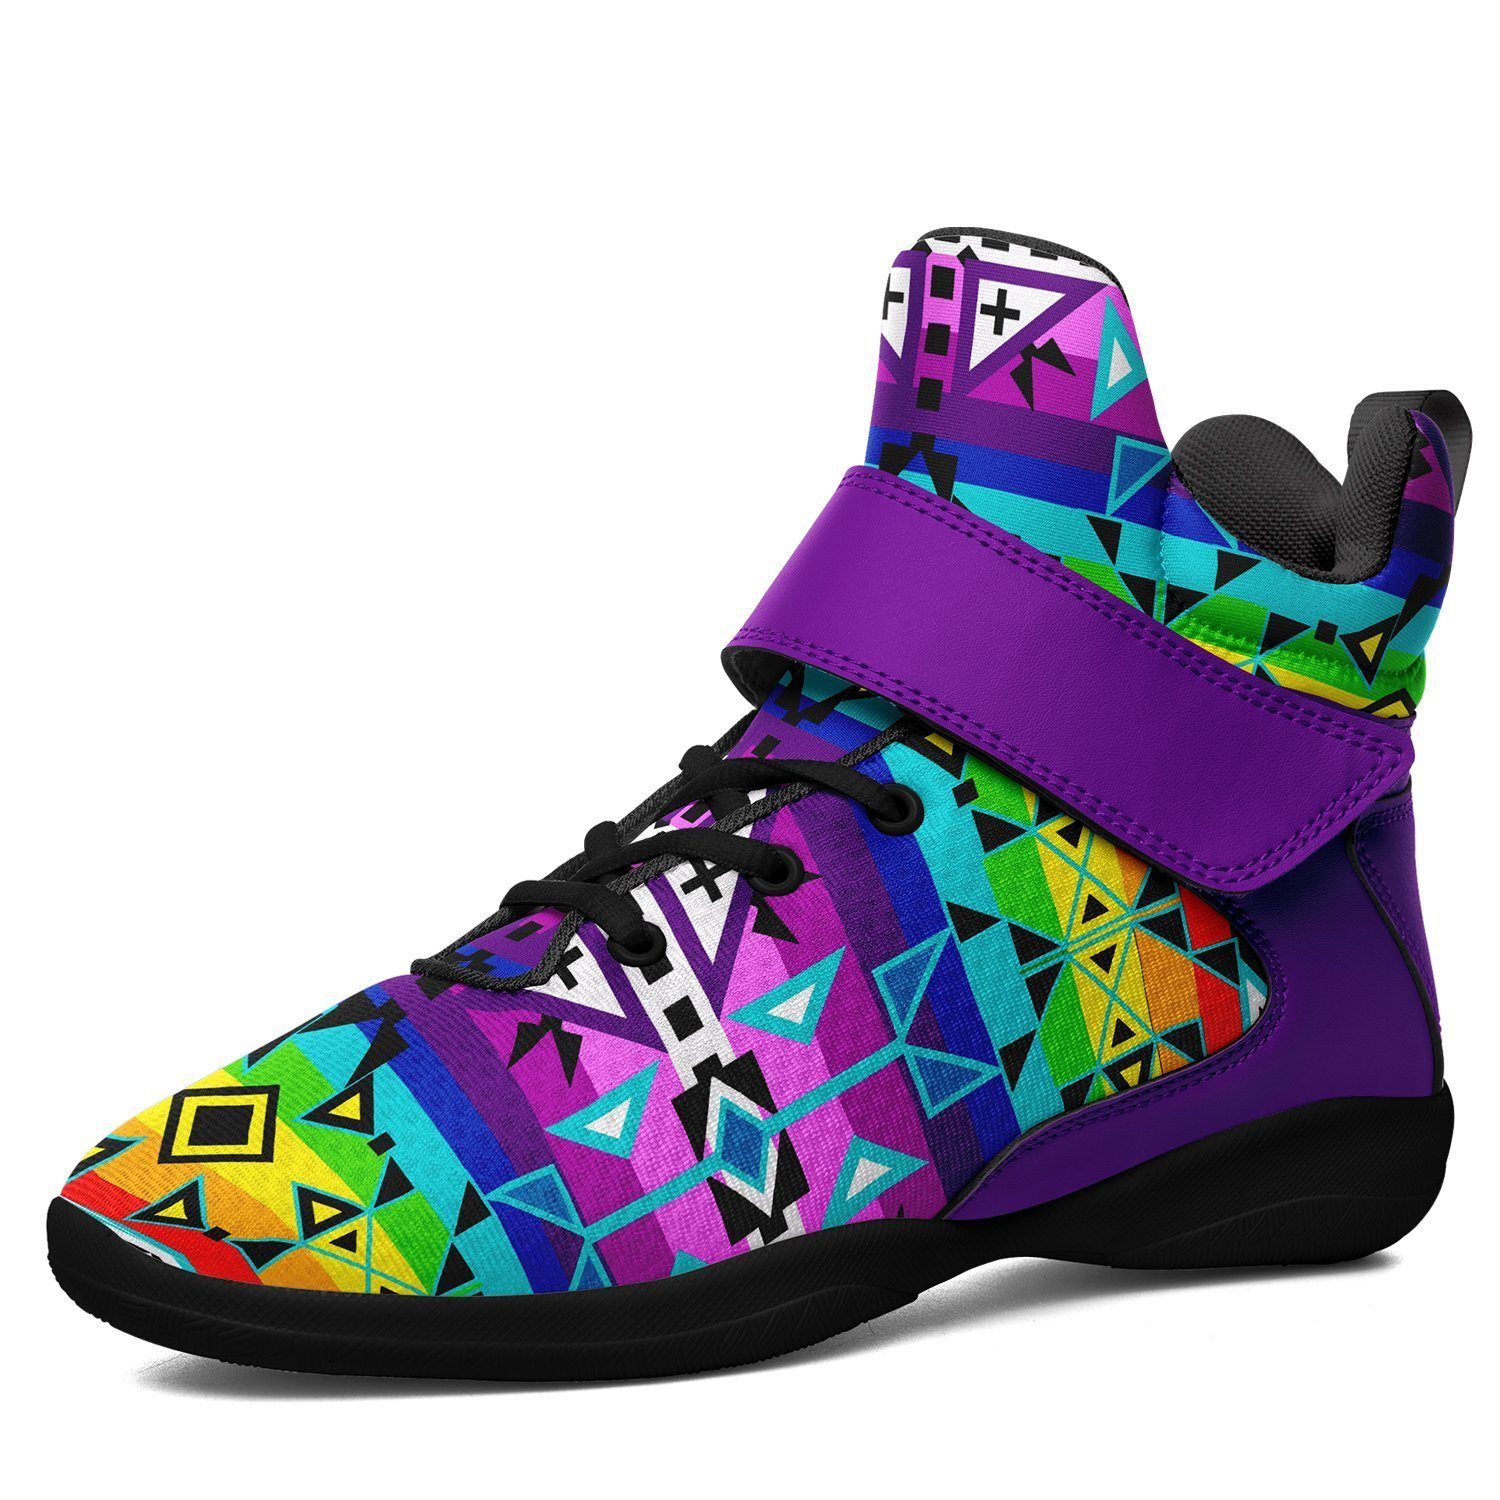 After the Rain Kid's Ipottaa Basketball / Sport High Top Shoes 49 Dzine US Child 12.5 / EUR 30 Black Sole with Indigo Strap 